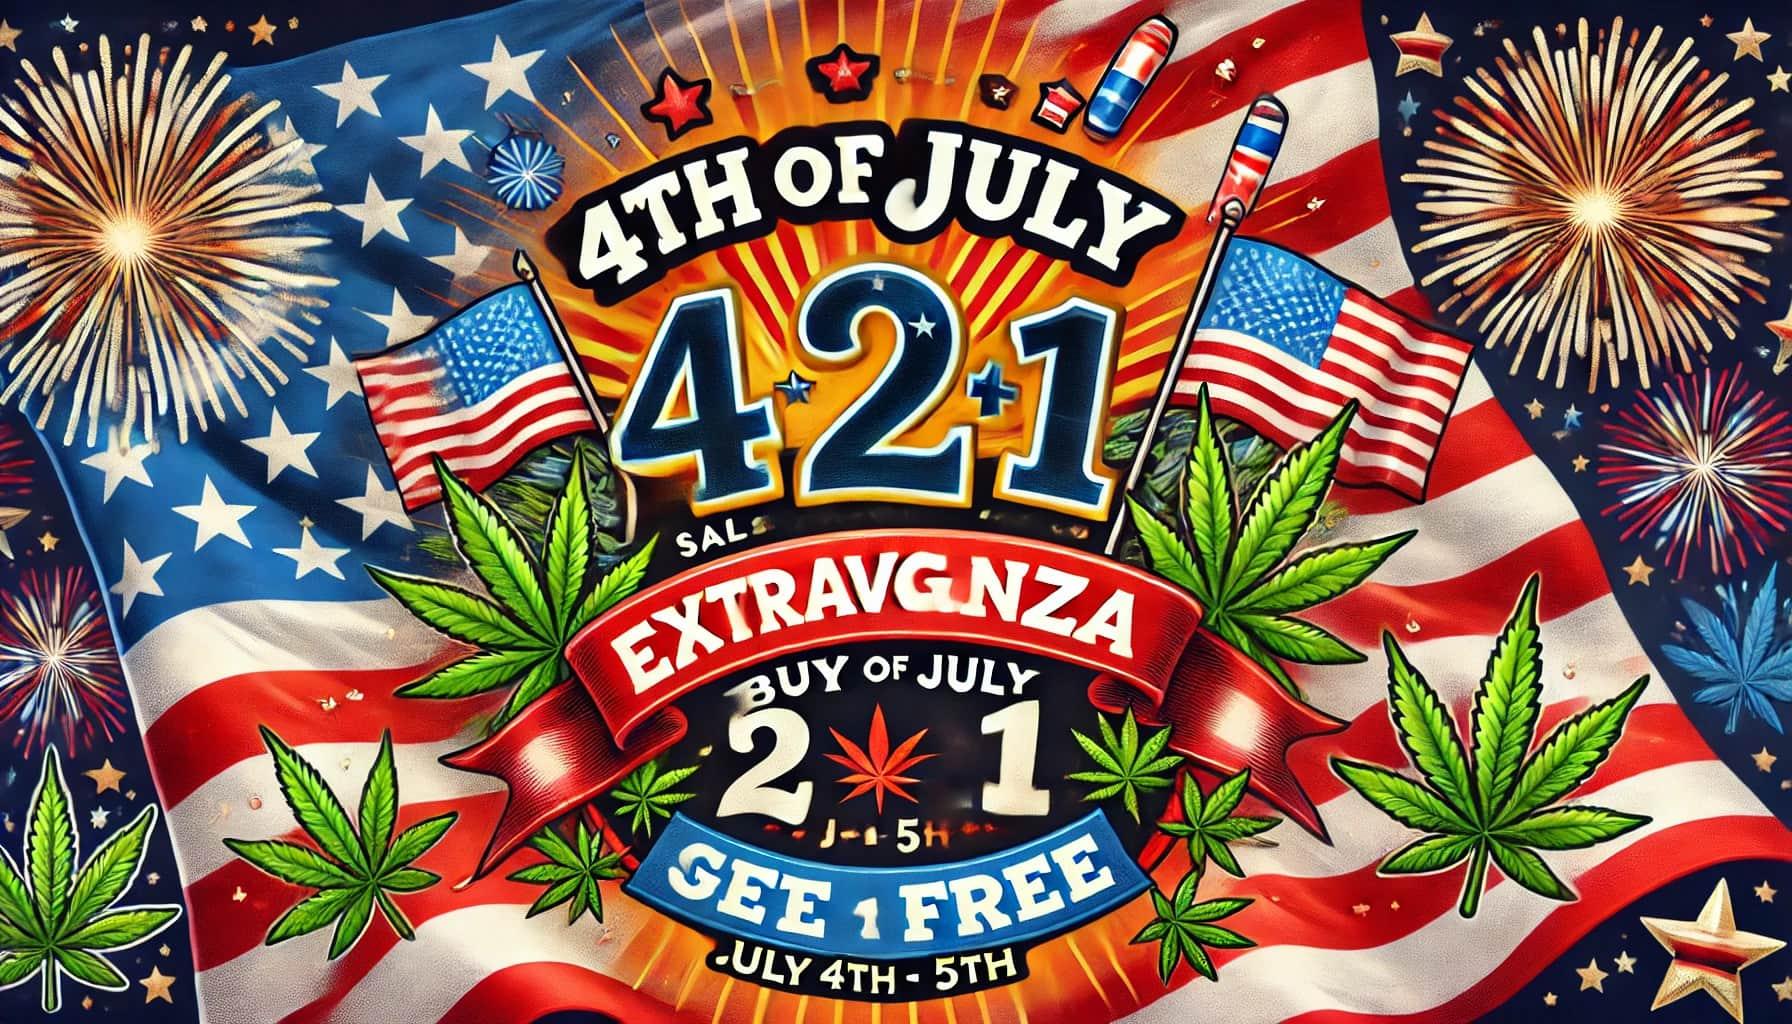 4th of July 2+1 Sale Extravaganza - Celebrate Independence Day with Exclusive Deals!